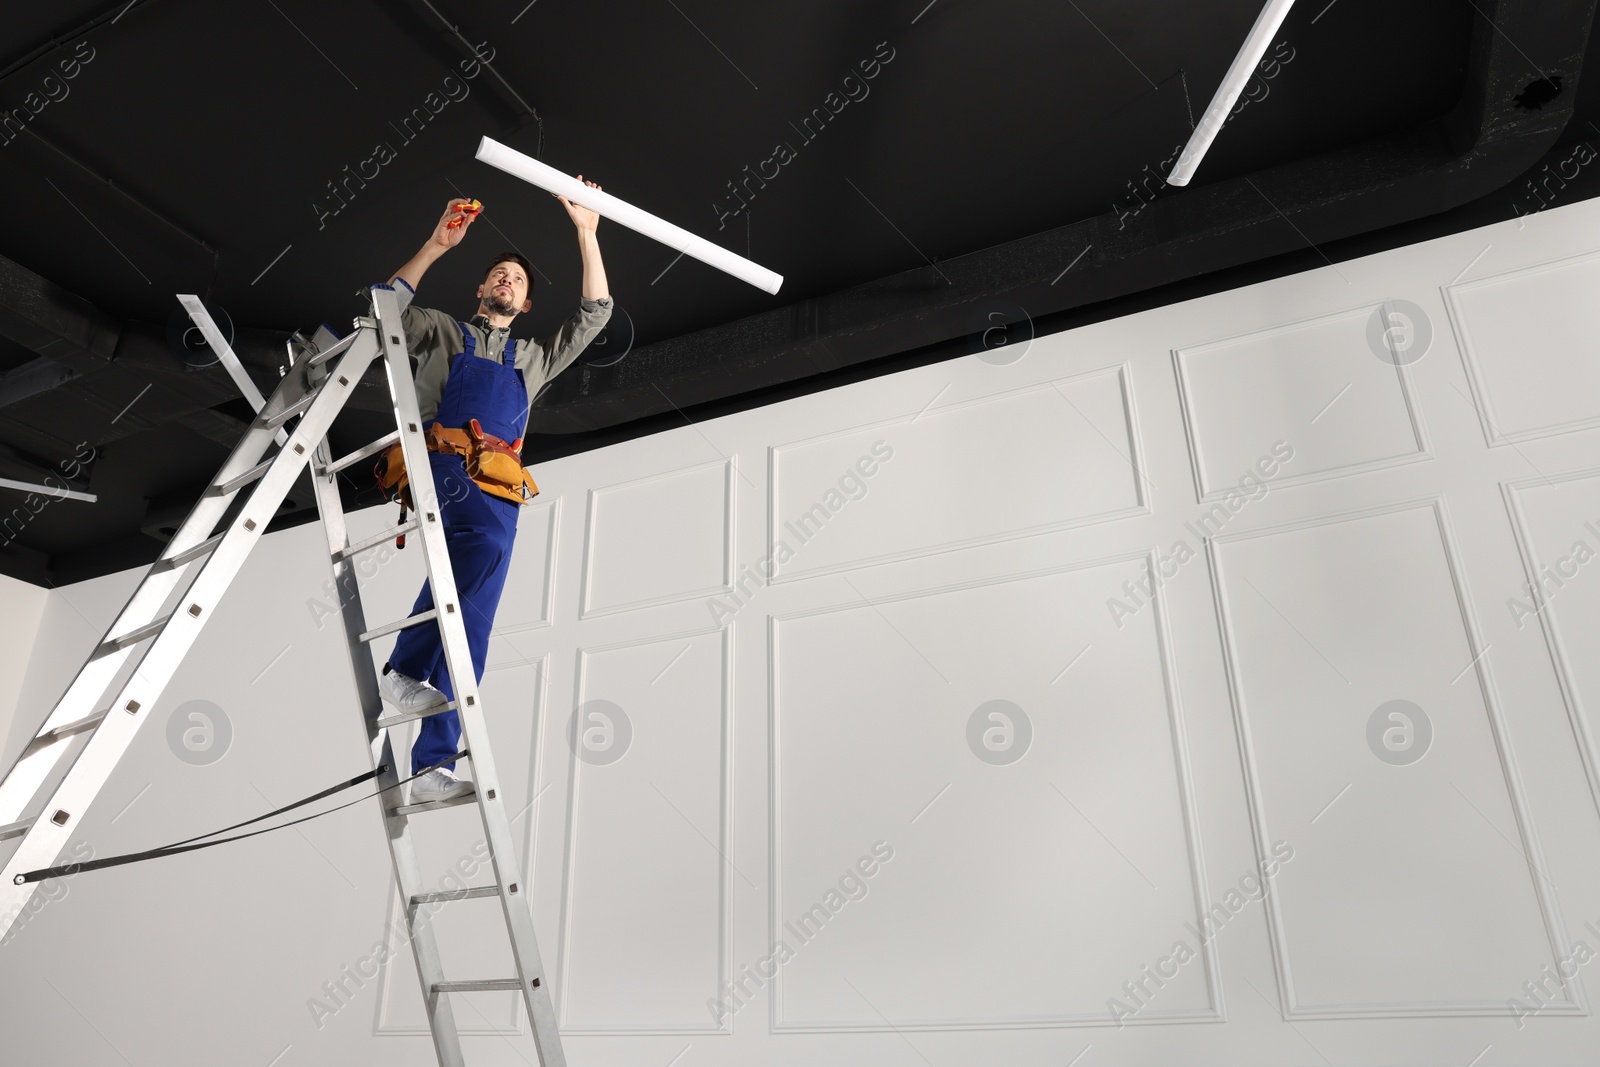 Photo of Electrician in uniform installing ceiling lamp indoors, low angle view